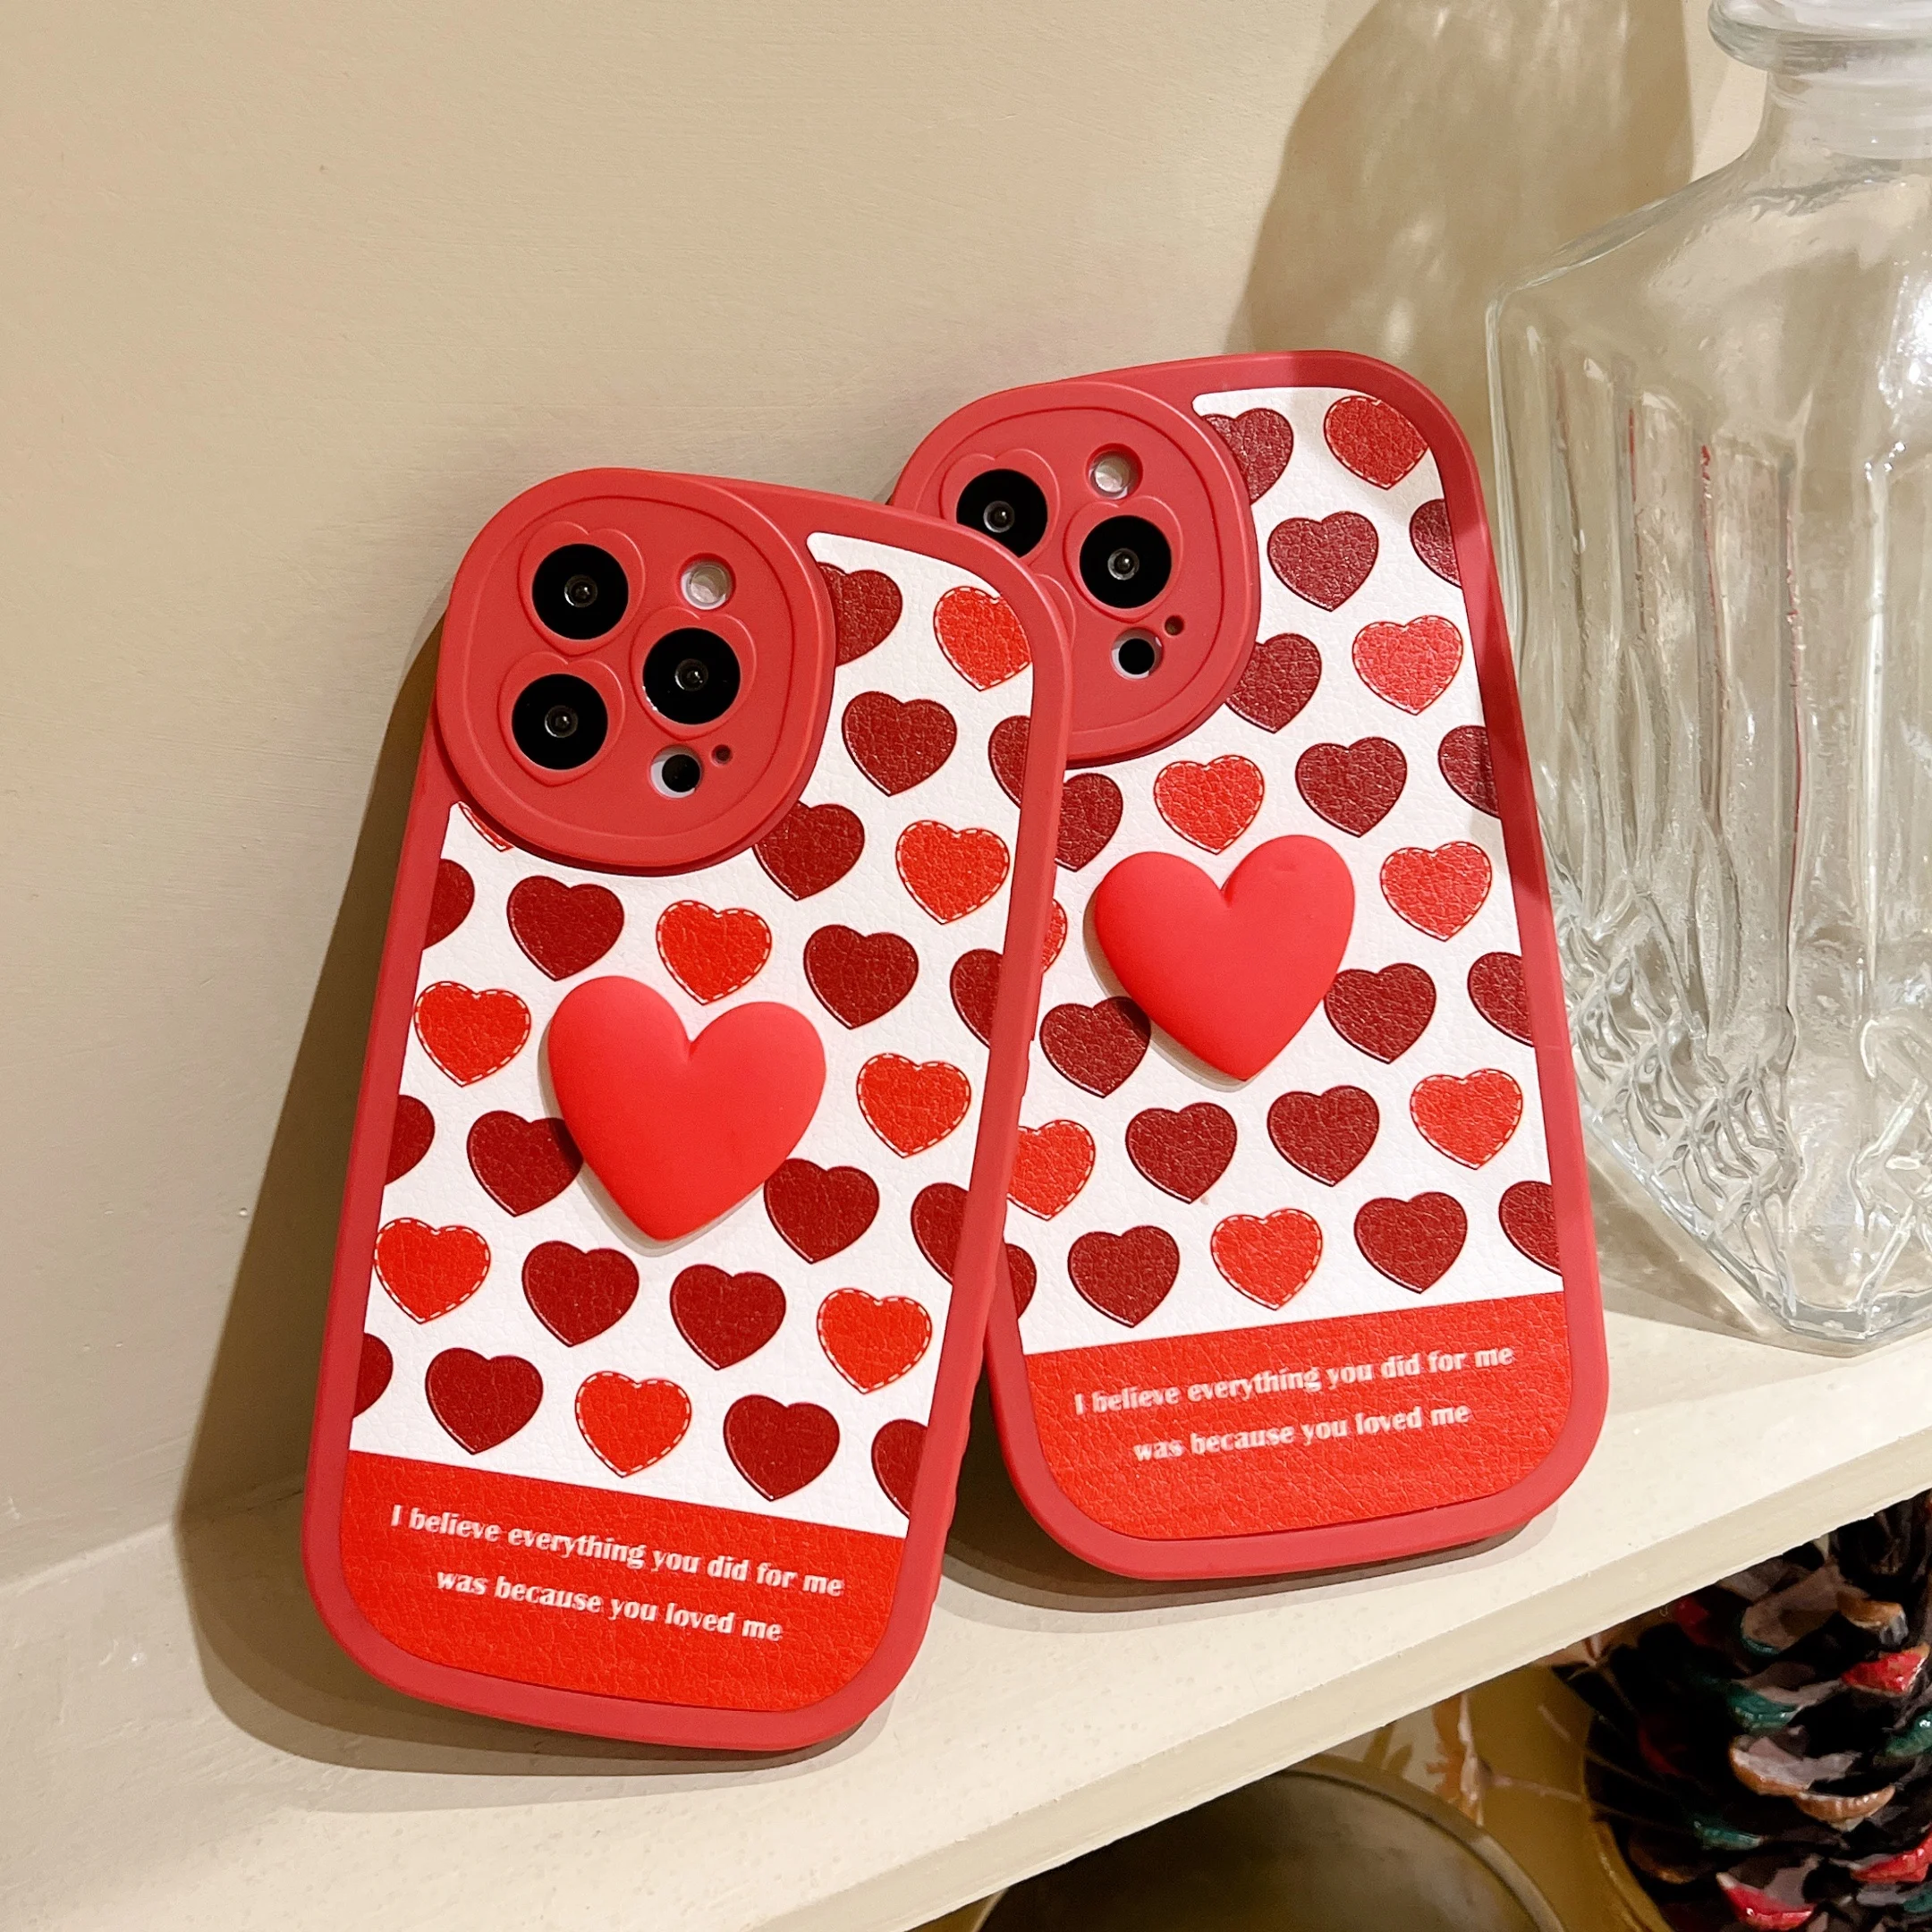 Red Phone Cases Iphone 11, Iphone Case 12 Korea Red